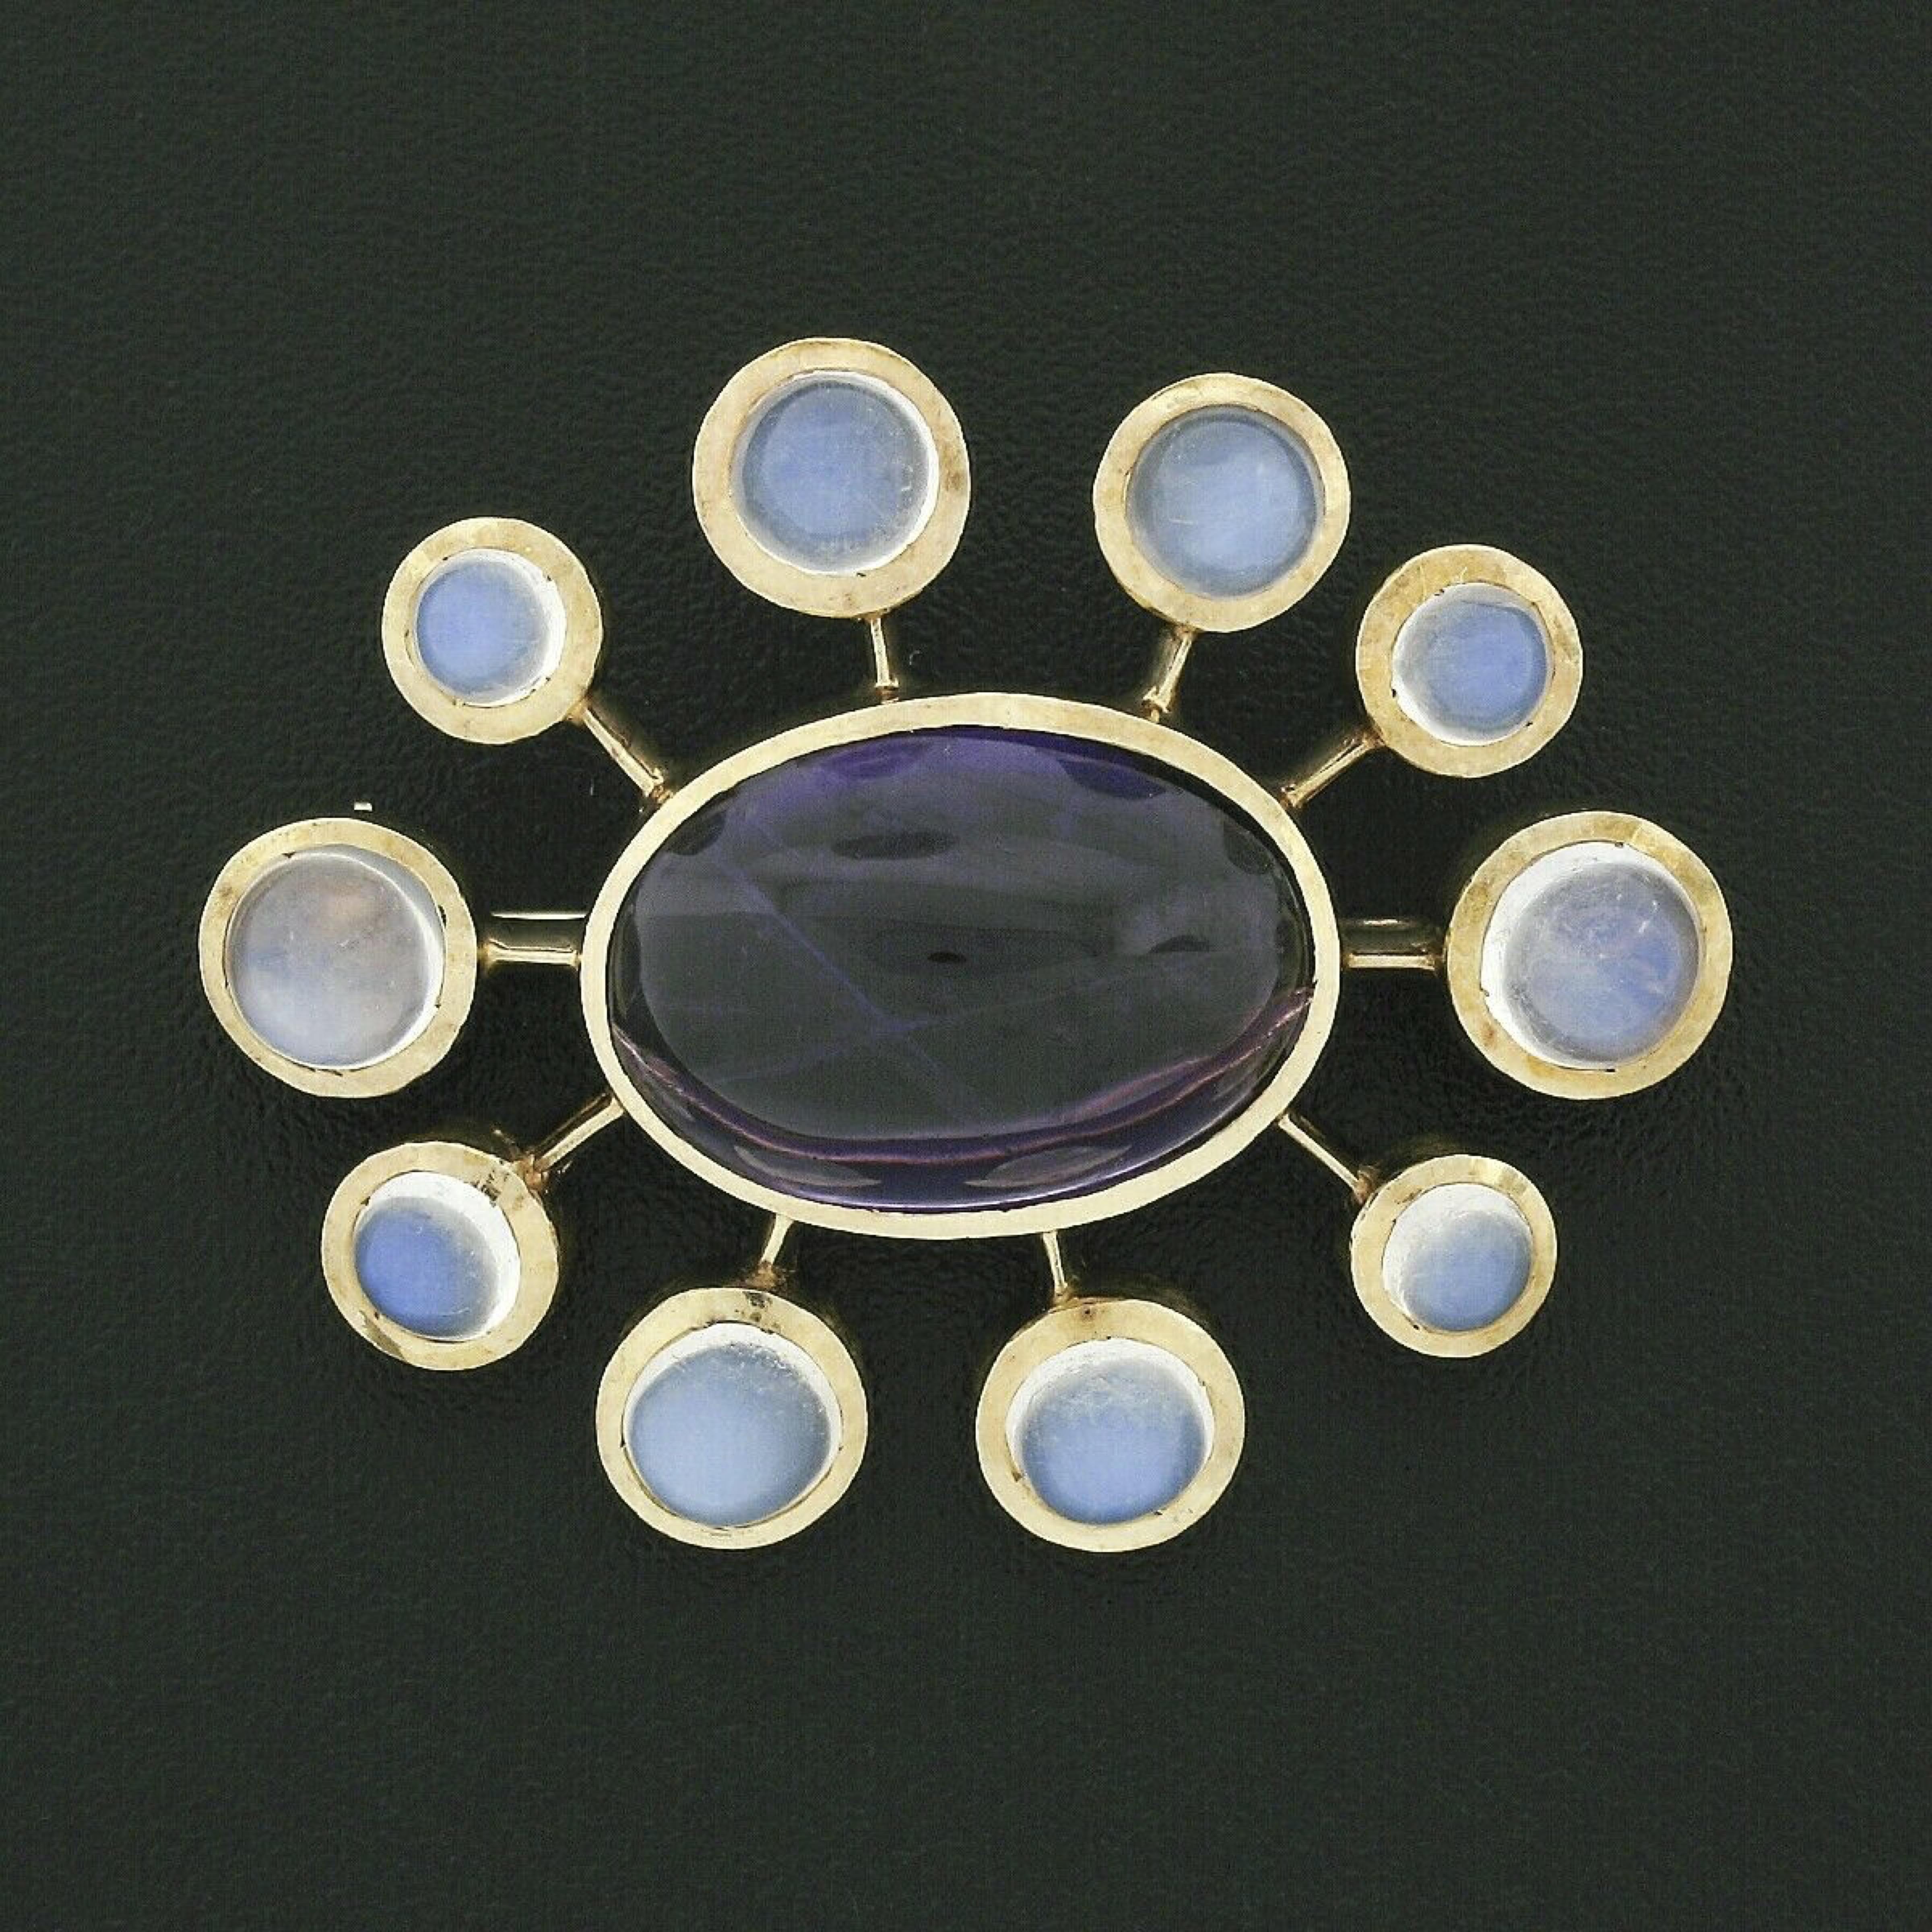 This is a truly gorgeous vintage pin brooch crafted in solid 14k yellow gold that features a nice bold design. It carries a fine quality amethyst neatly set at the center surrounded by moonstones that show variation in size throughout. The amethyst